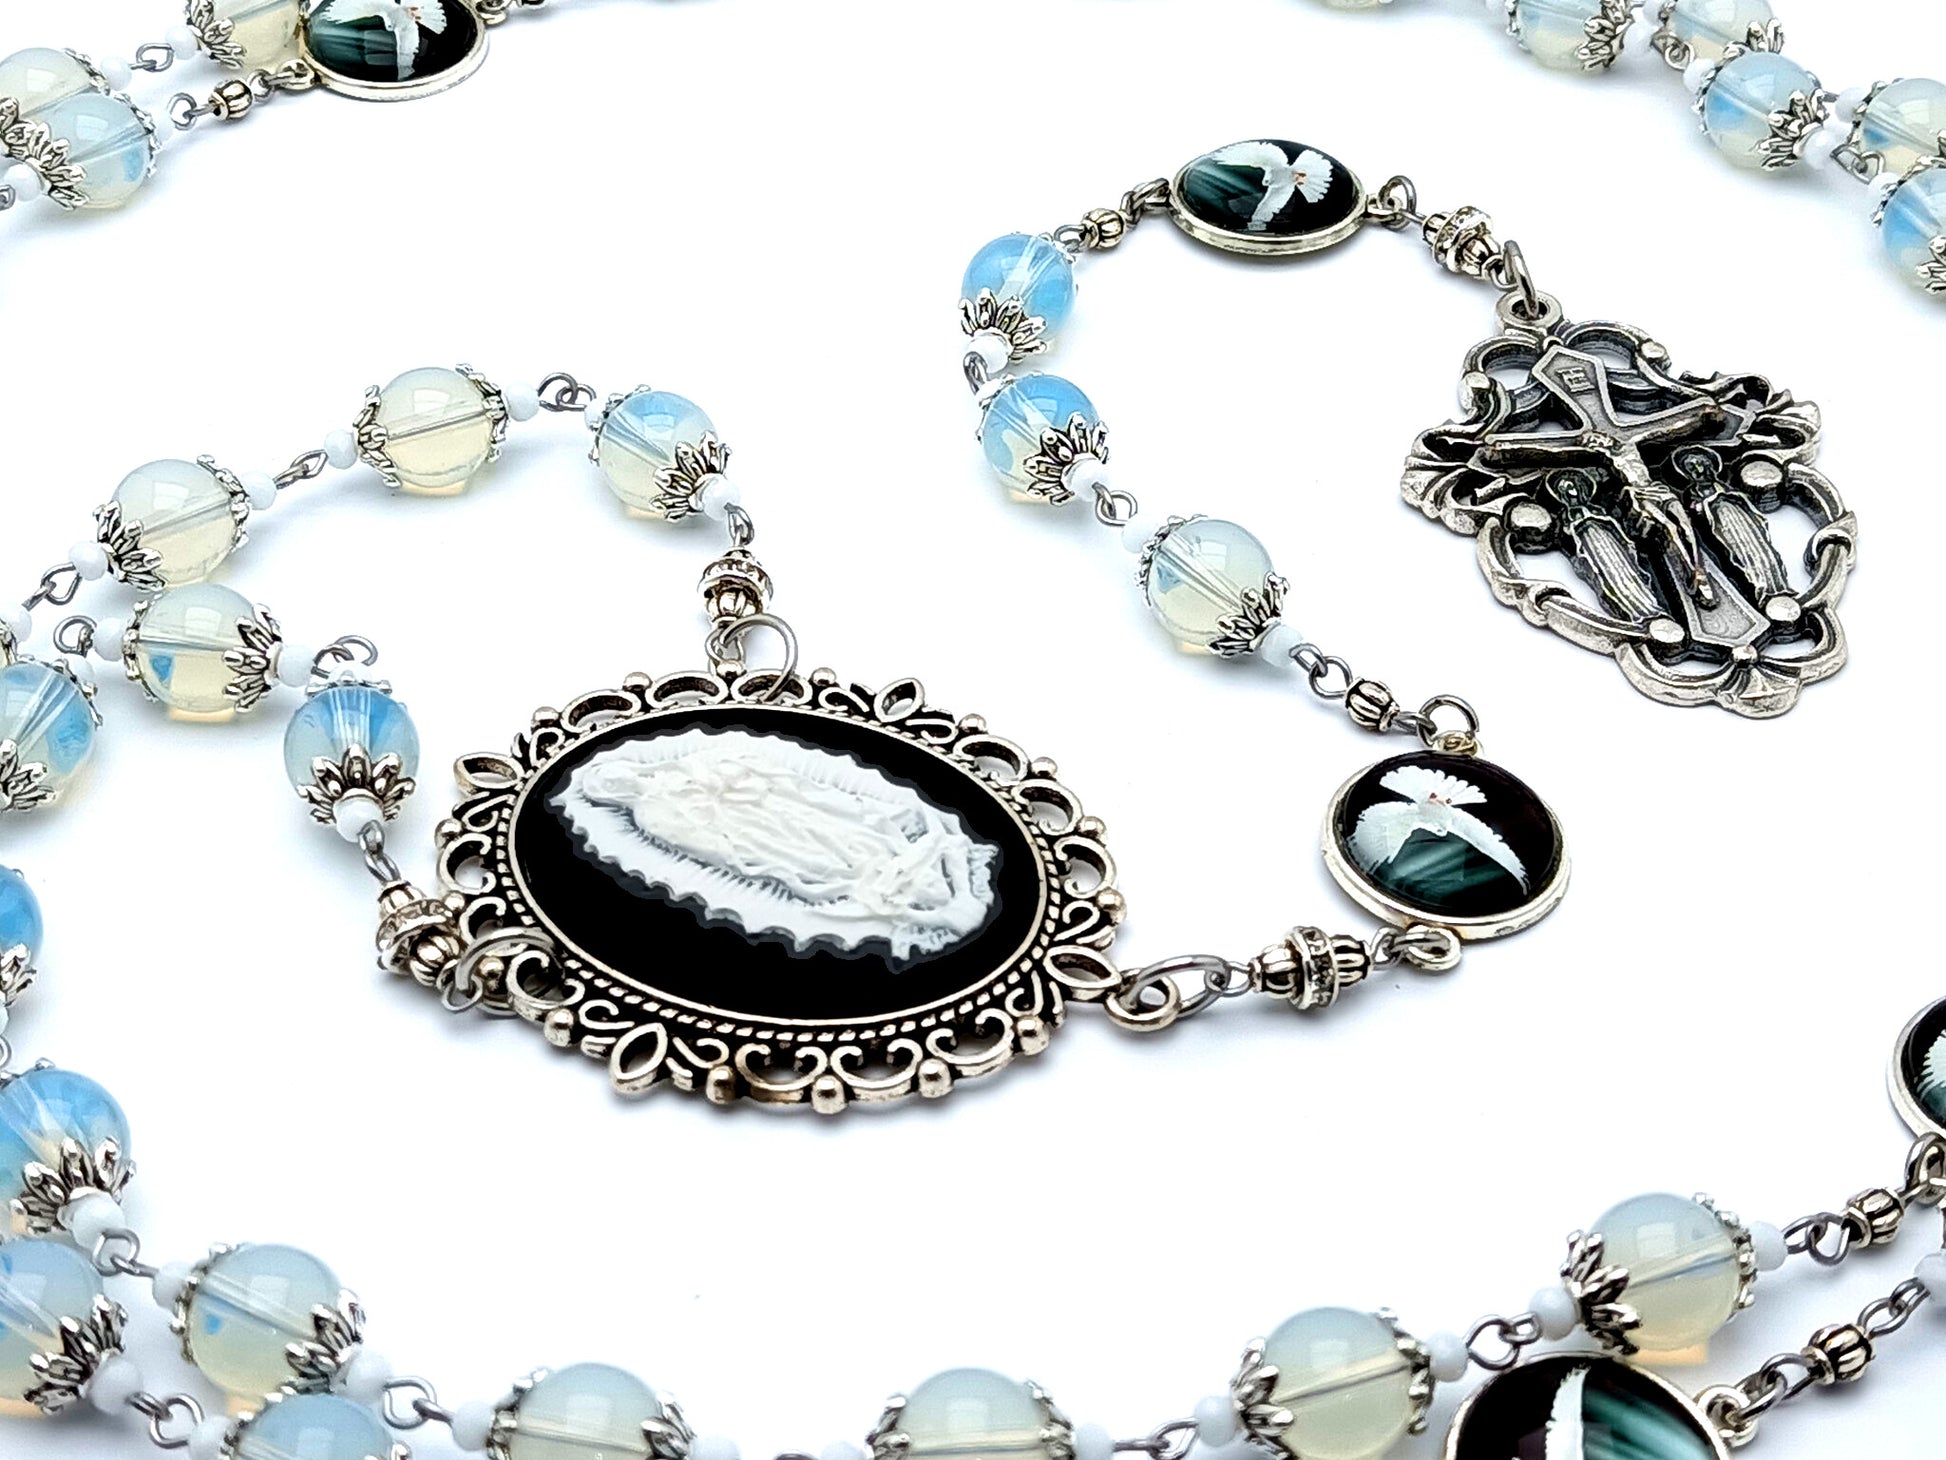 Our Lady of Guadalupe cameo unique rosary beads with opal gemstone beads and Holy Spirit domed picture medals and Holy Angel crucifix.